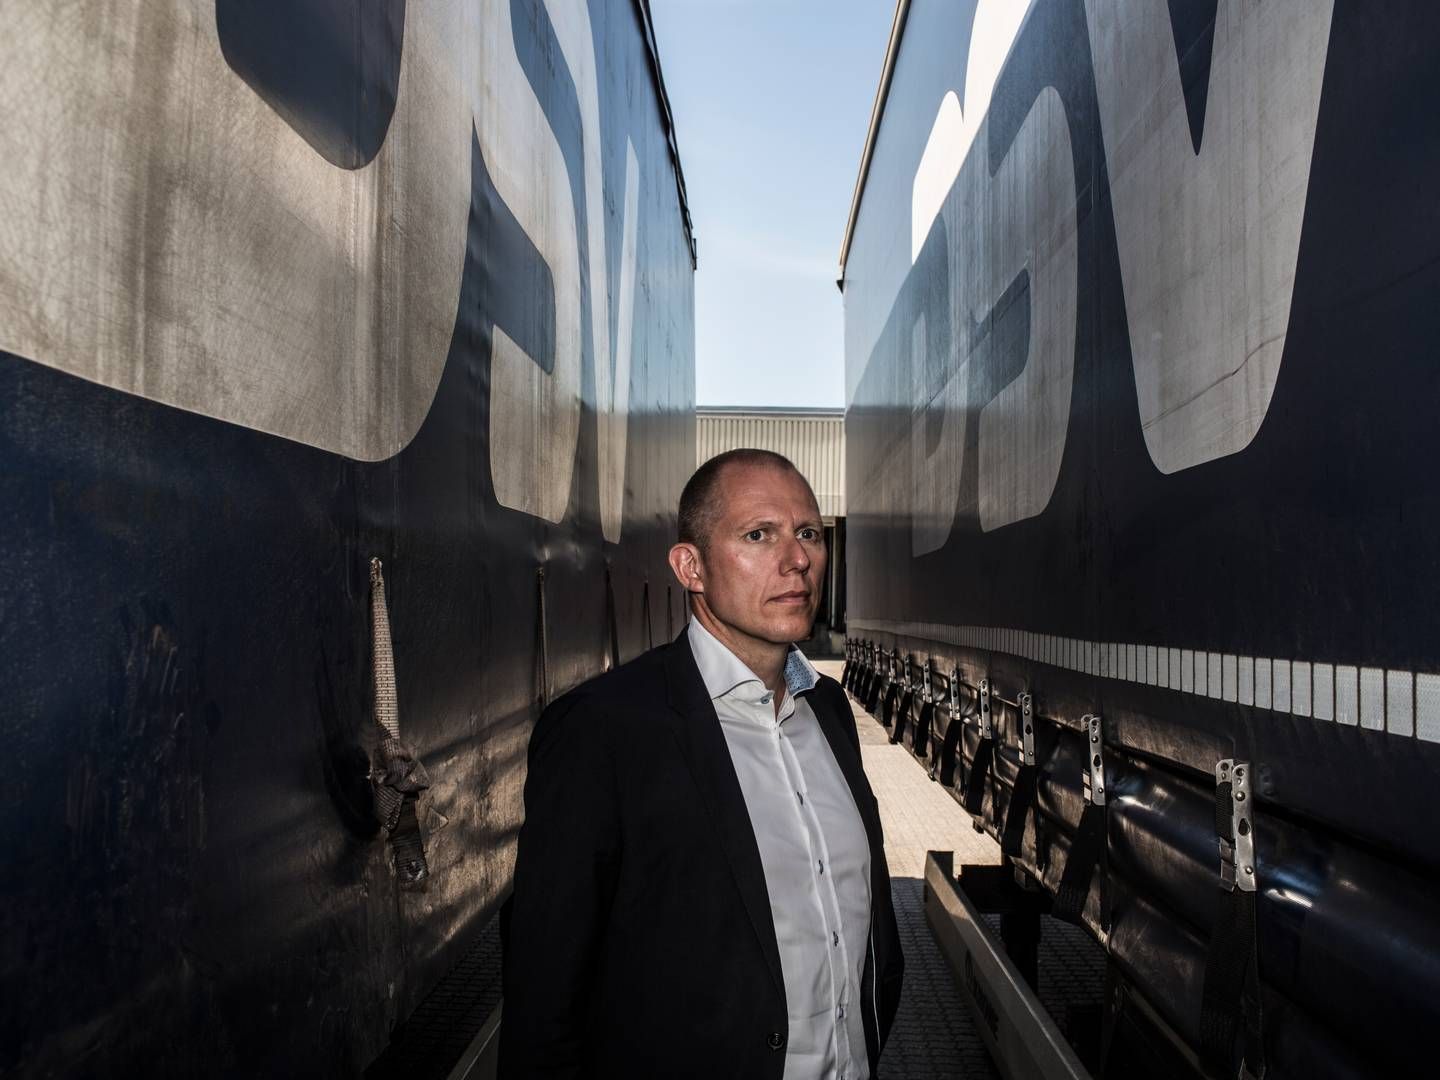 Jens Bjørn Andersen, CEO at DSV, which just filed for approval of its acquisition of Panalpina | Photo: Cecile Smetana/Jyllands-Posten/Ritzau Scanpix